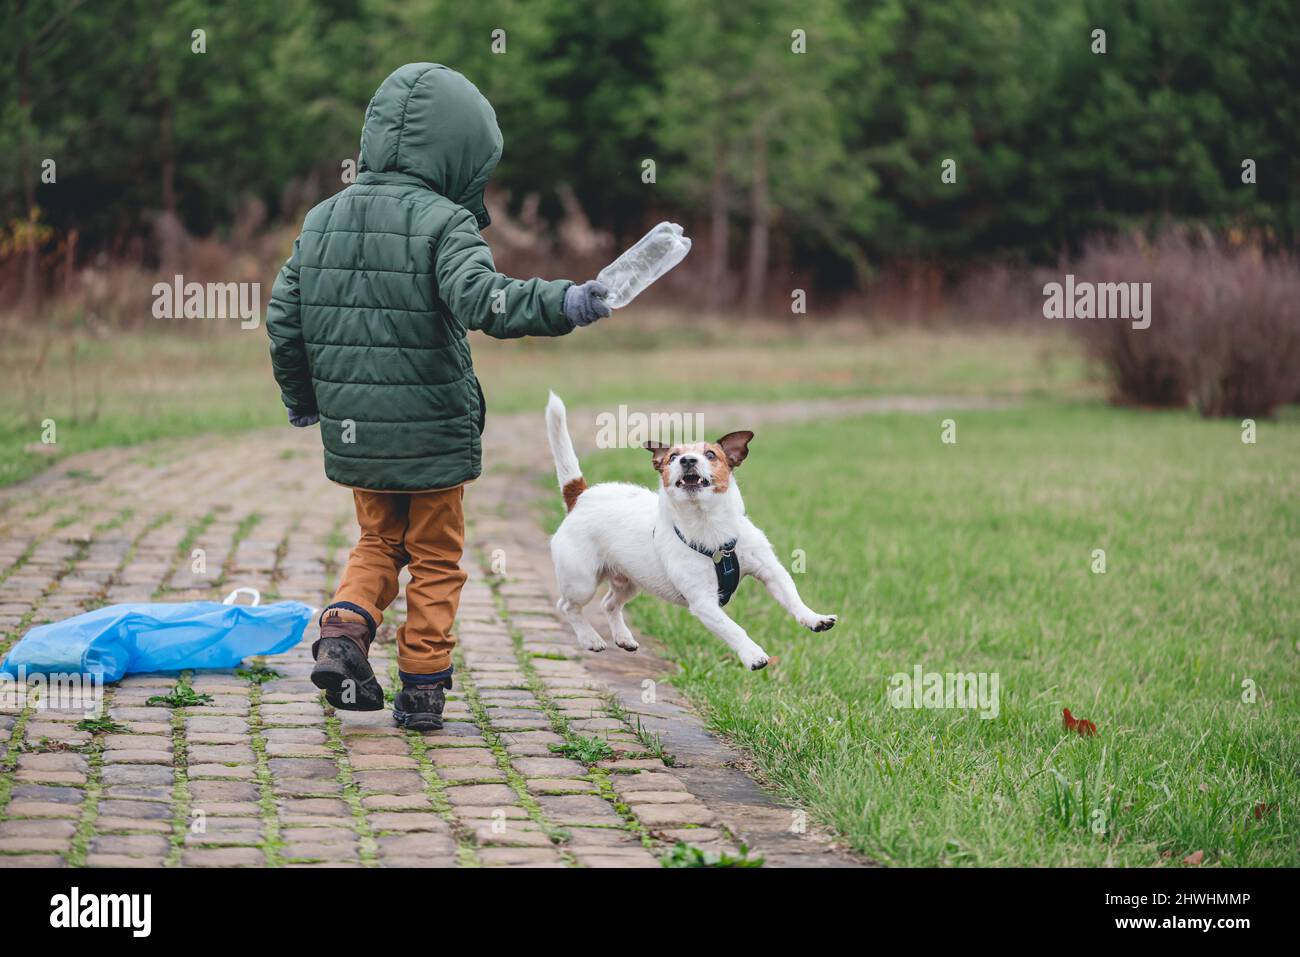 Kid playing with dog while picking up plastic waste in park. Family adding fun to volunteer work Stock Photo